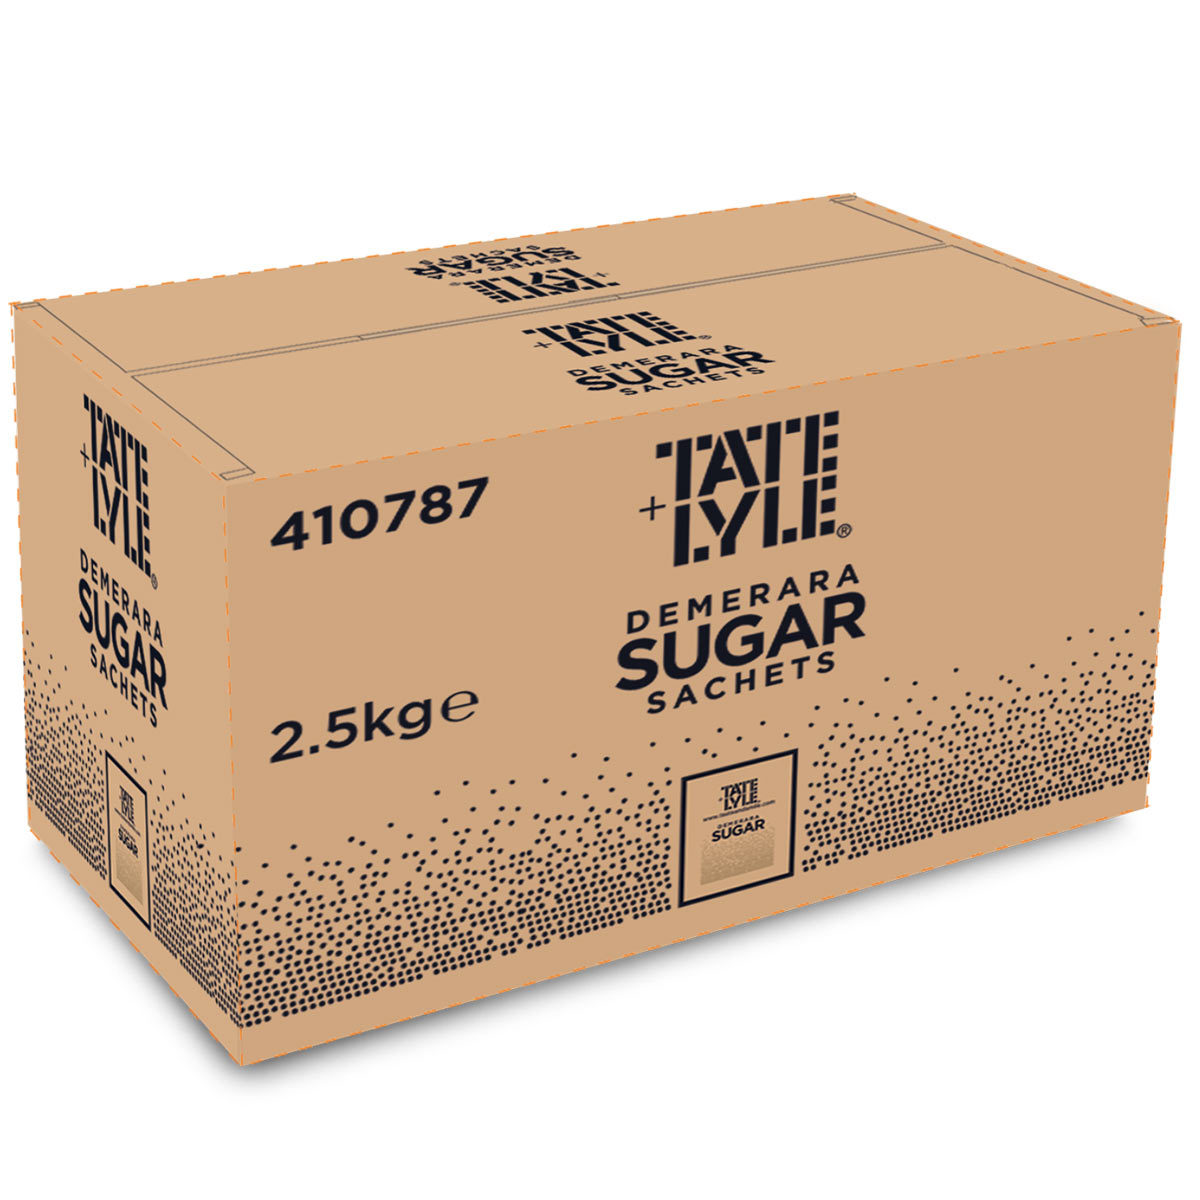 Image of brown Tate & Lyle box on white background with Demerara Sugar Sachets text